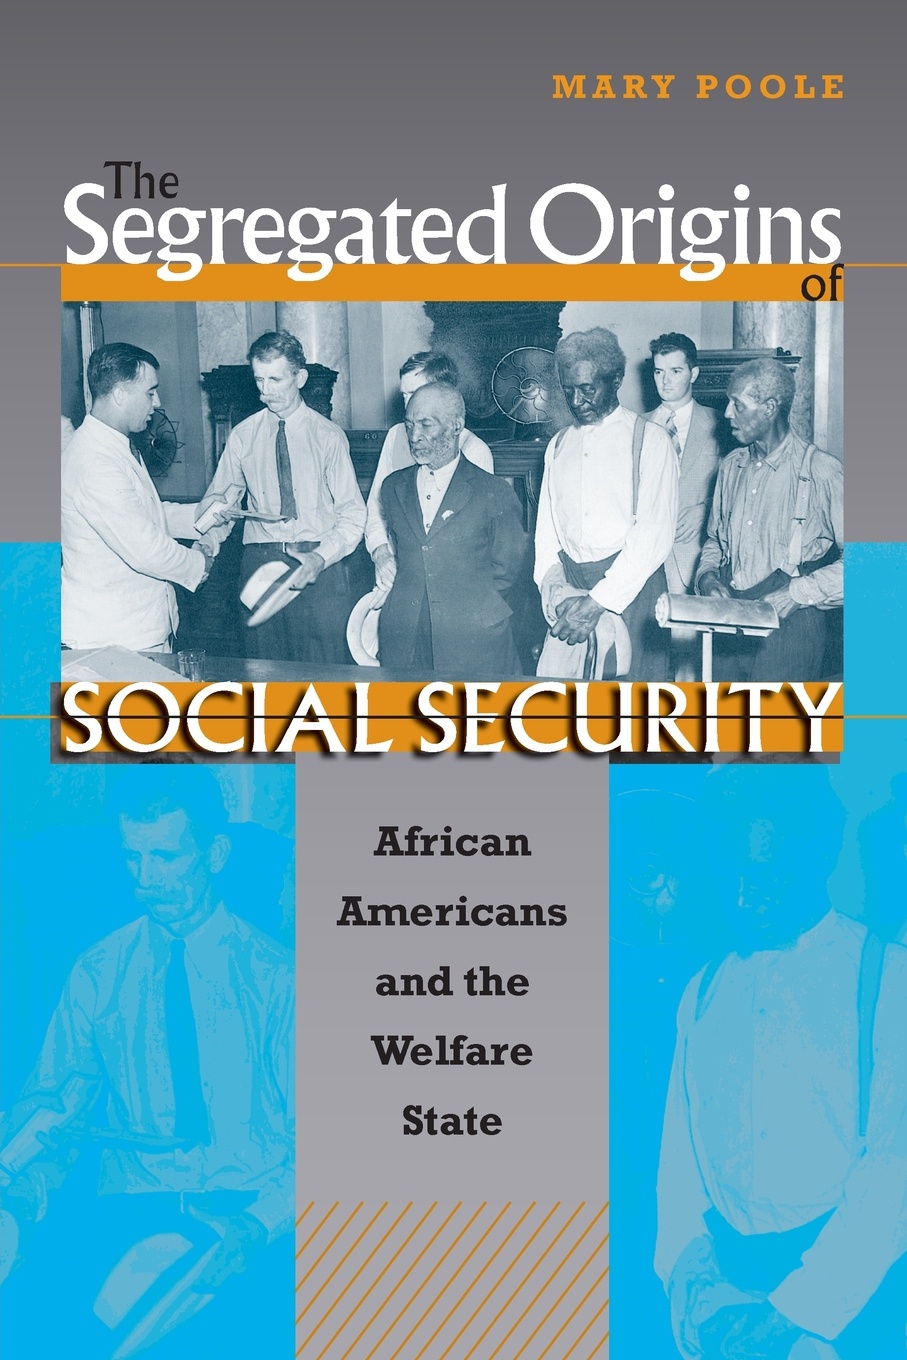 The Segregated Origins of Social Security. African Americans and the Welfare State